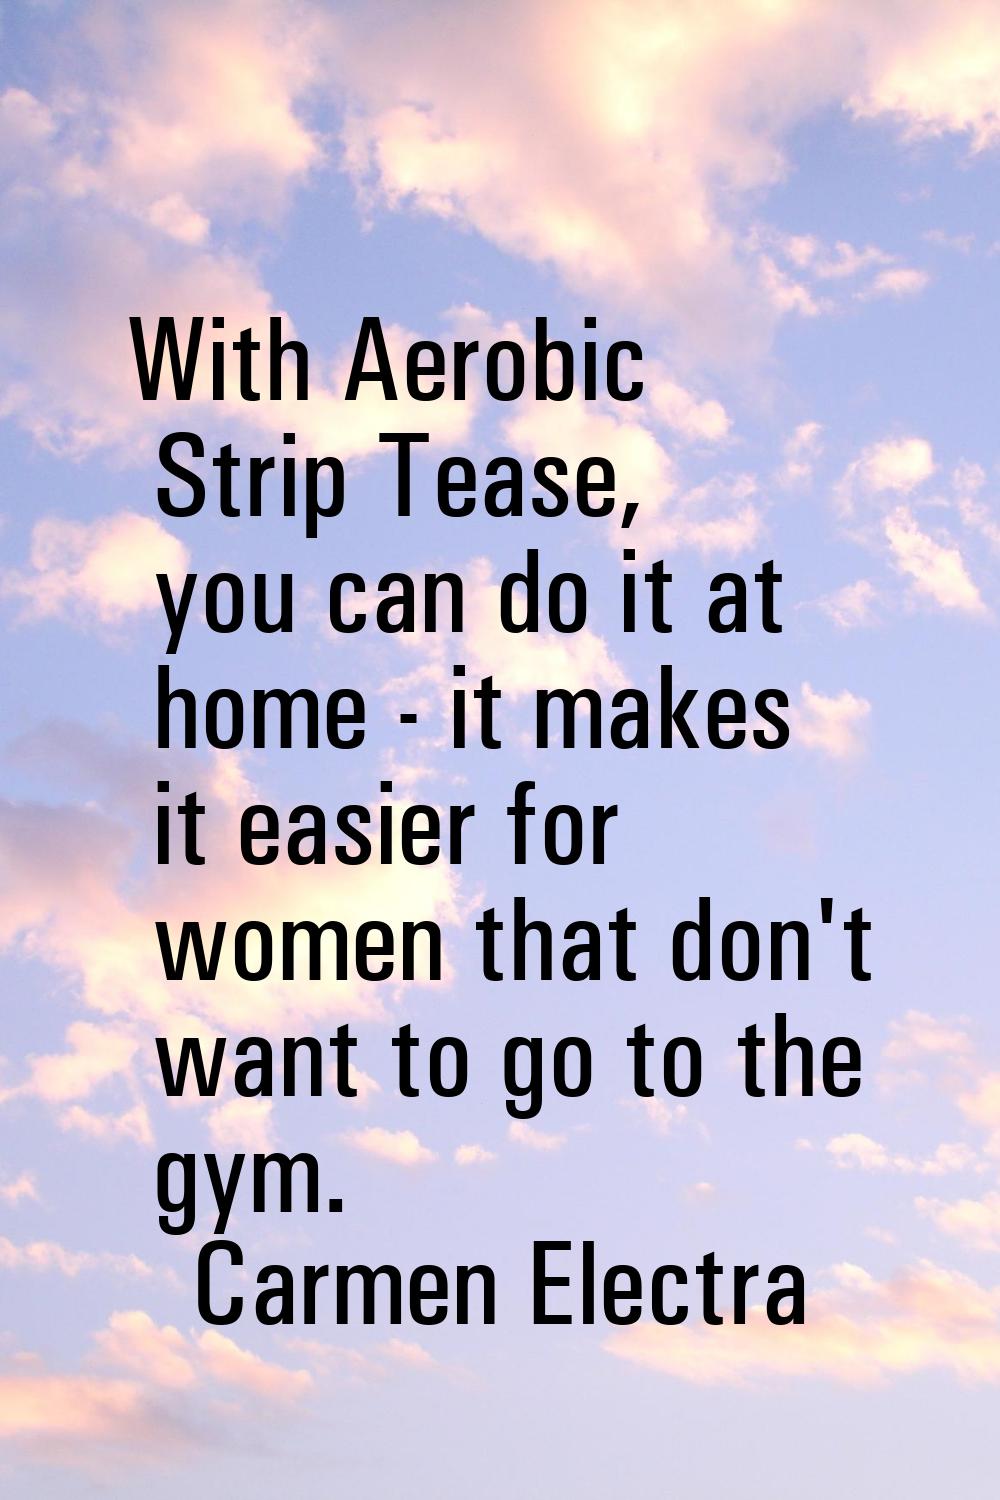 With Aerobic Strip Tease, you can do it at home - it makes it easier for women that don't want to g